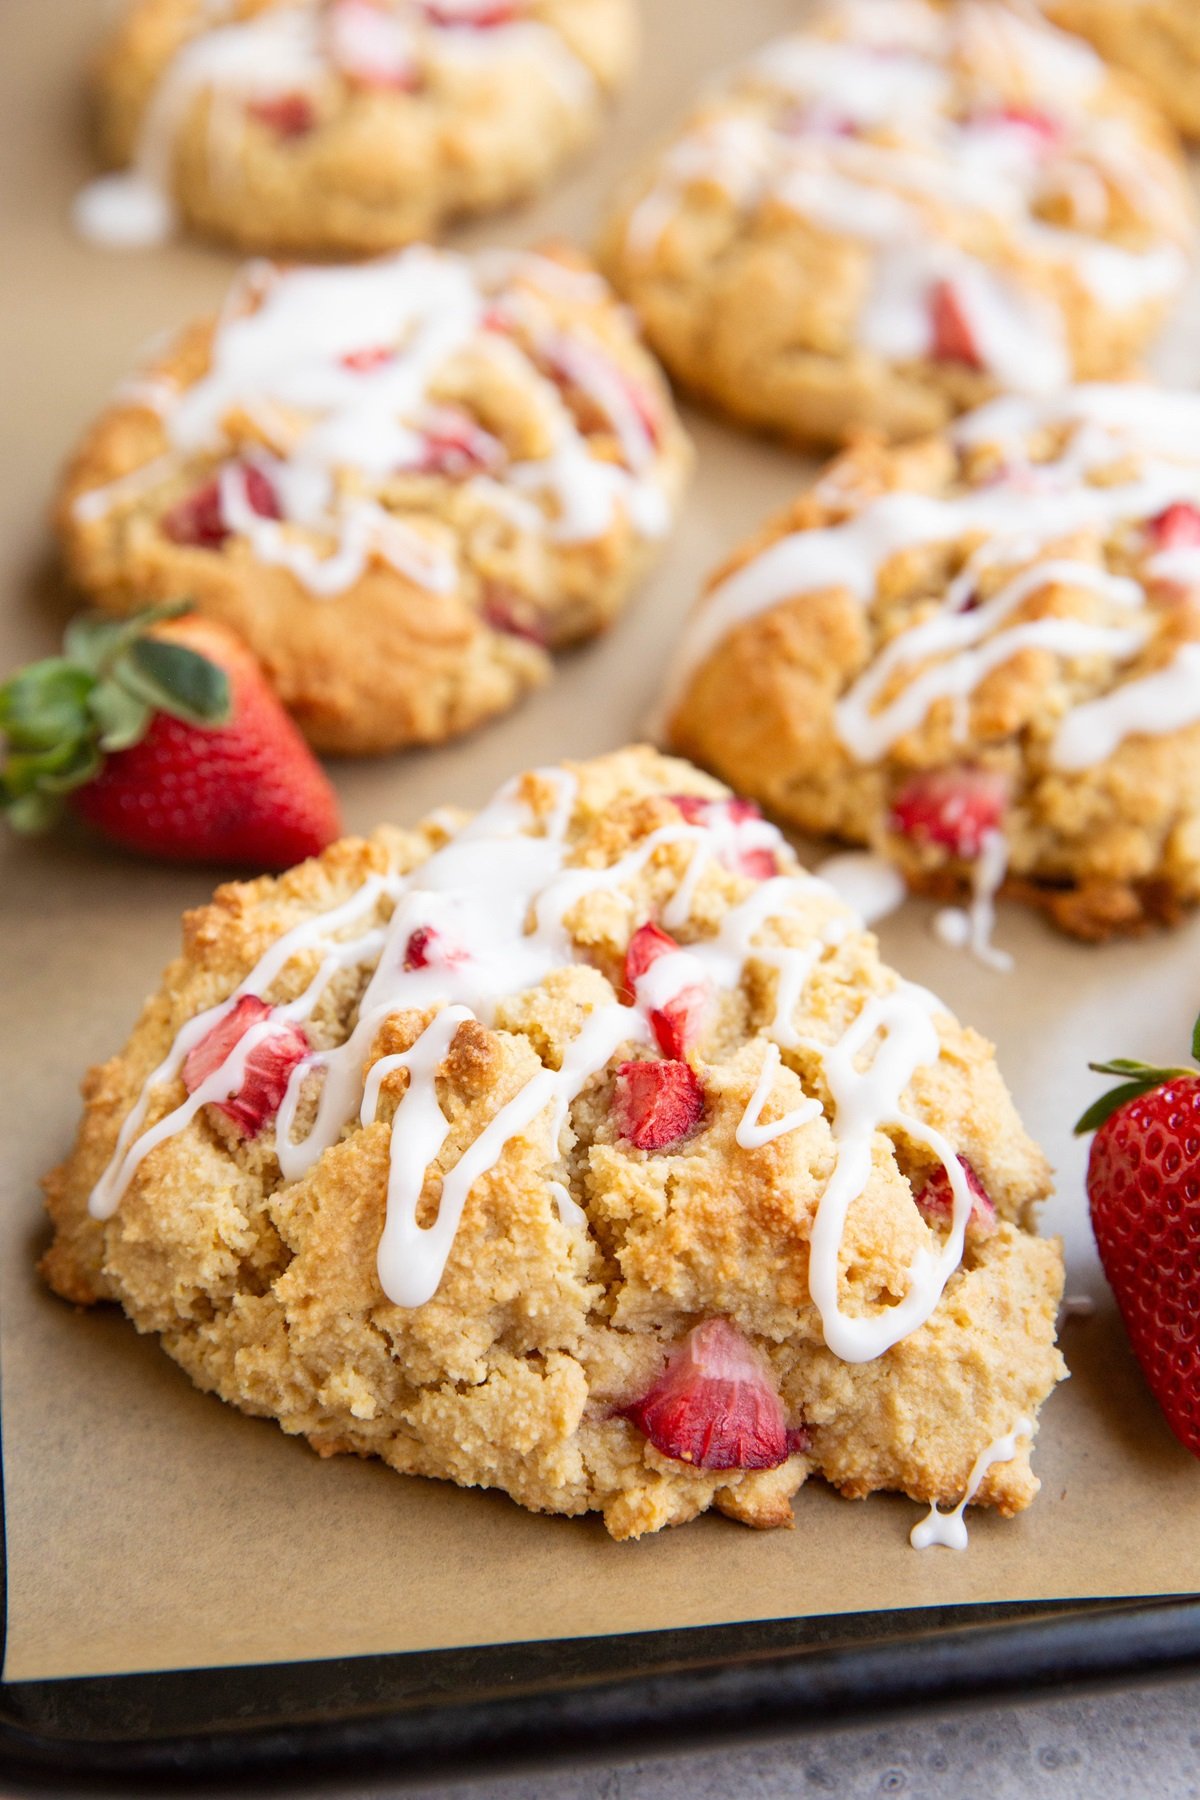 Baking sheet of almond flour strawberry scones fresh out of the oven.